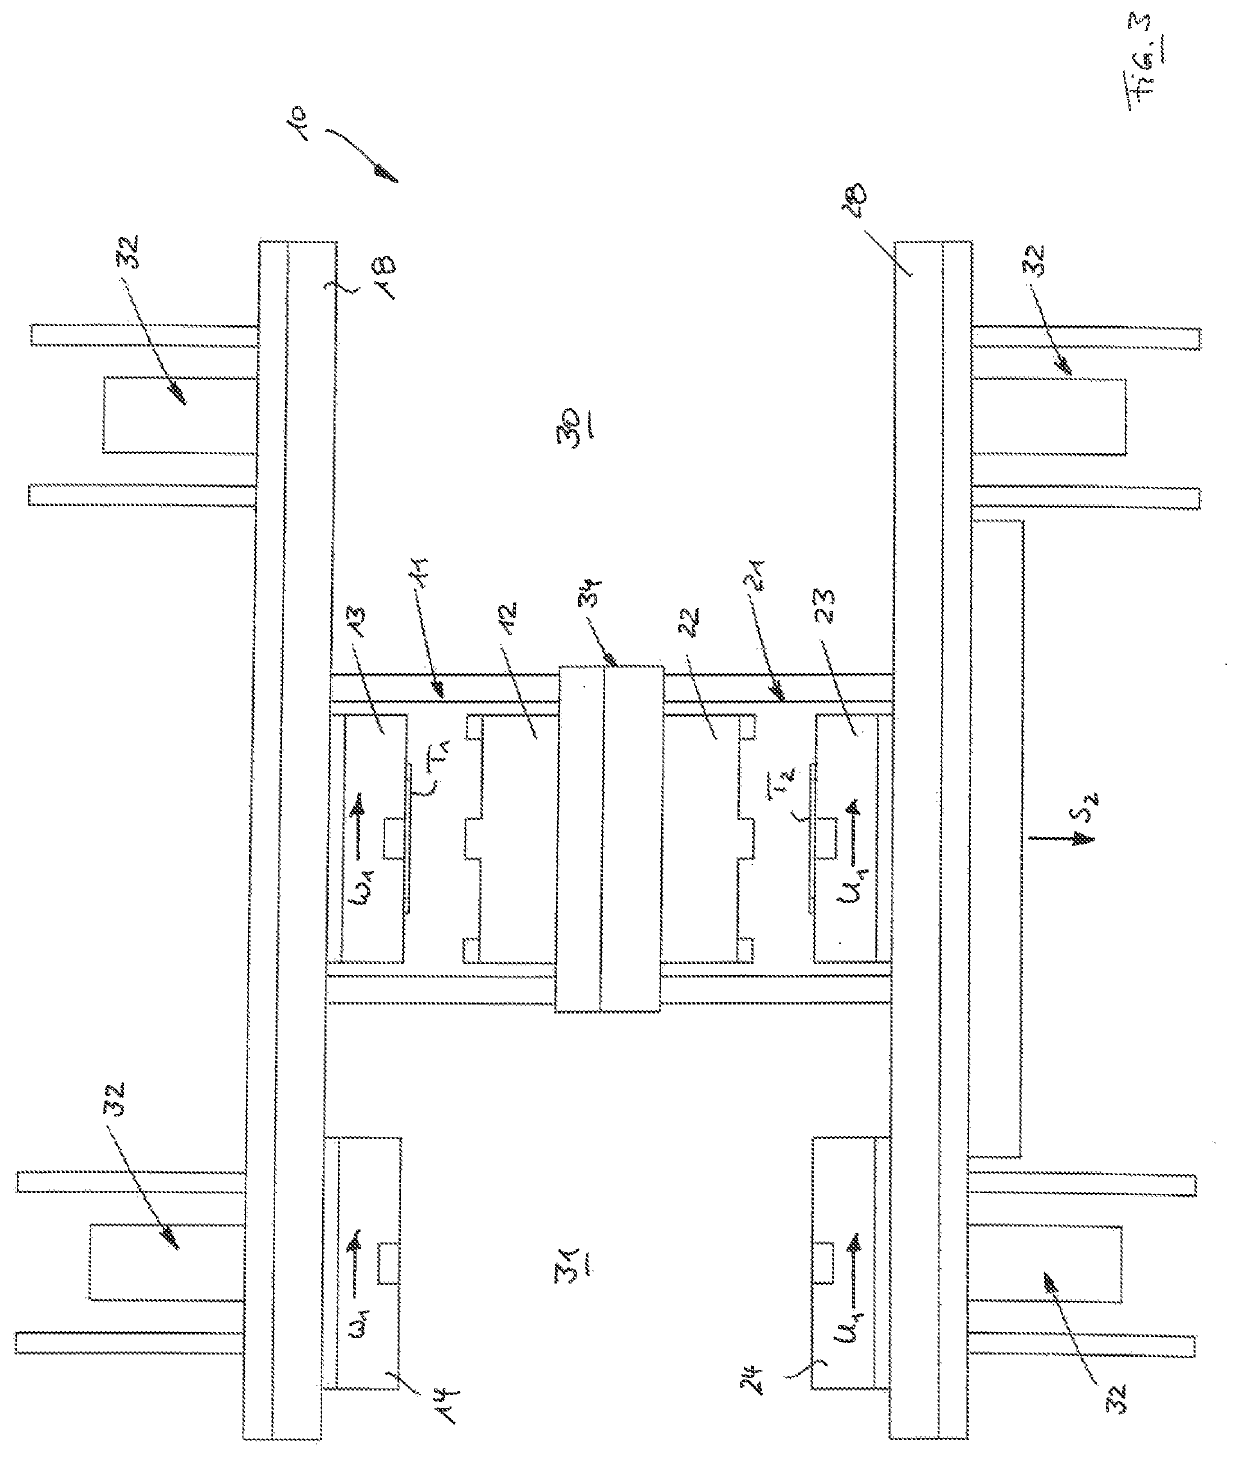 Device and process for manufacturing a component formed of a plurality of moldings made of plastic and welded together